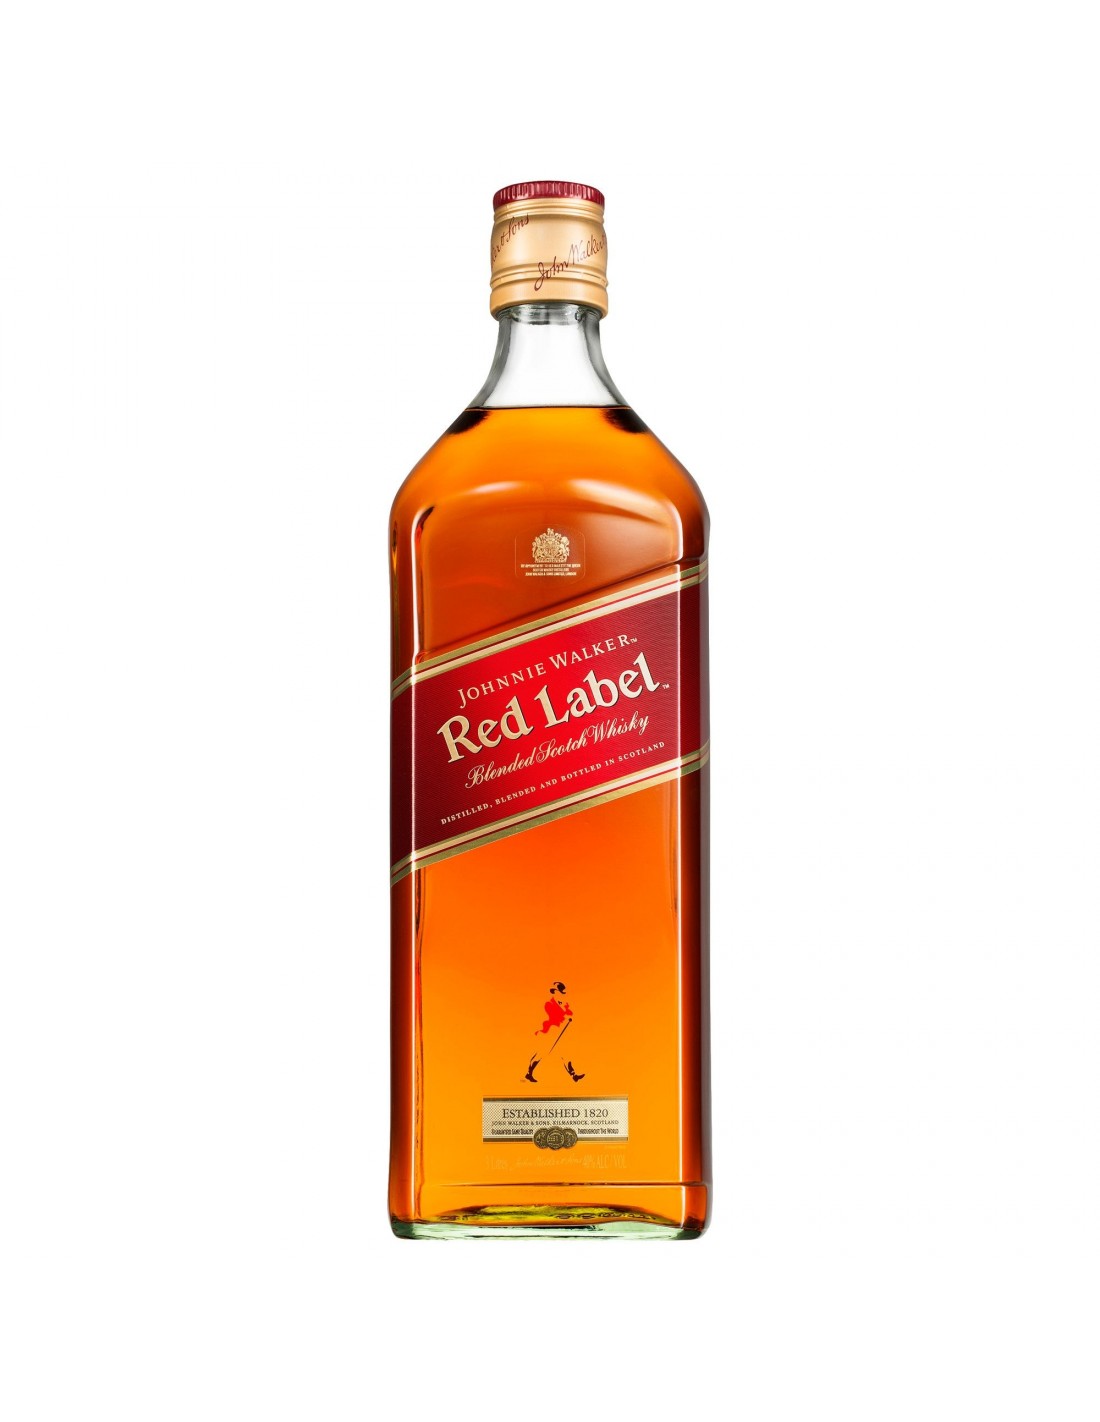 Whisky Johnnie Walker Red Label, 40% alc., 3L, Scotia